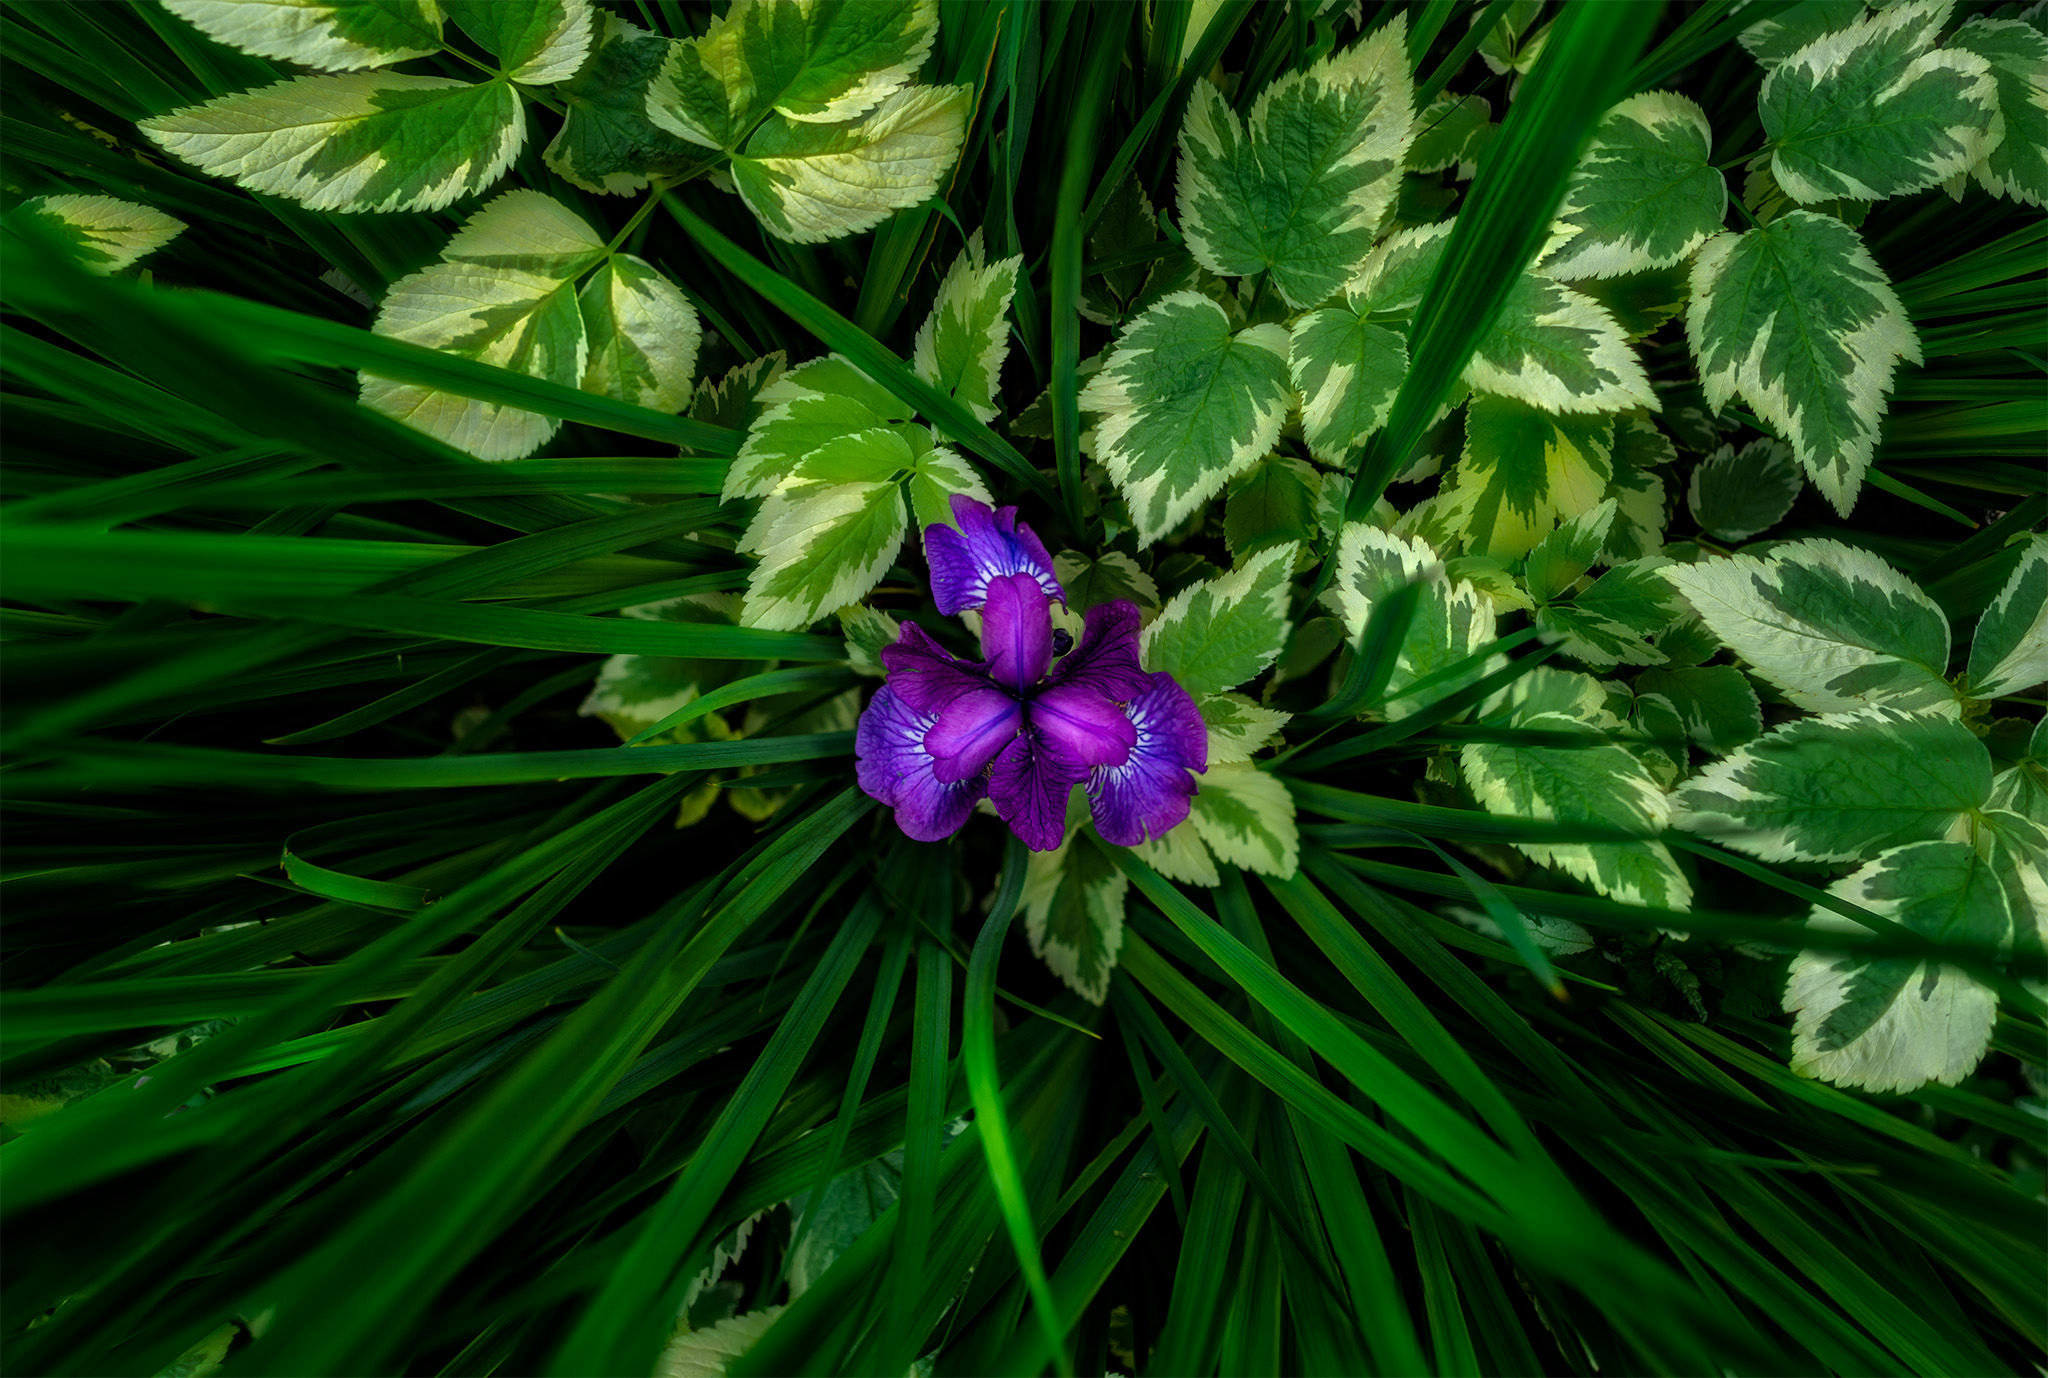 An abstract photograph of a garden flower mixed with grasses and leaves. The flower is alone in the center and the leaves and grasses split down the middle